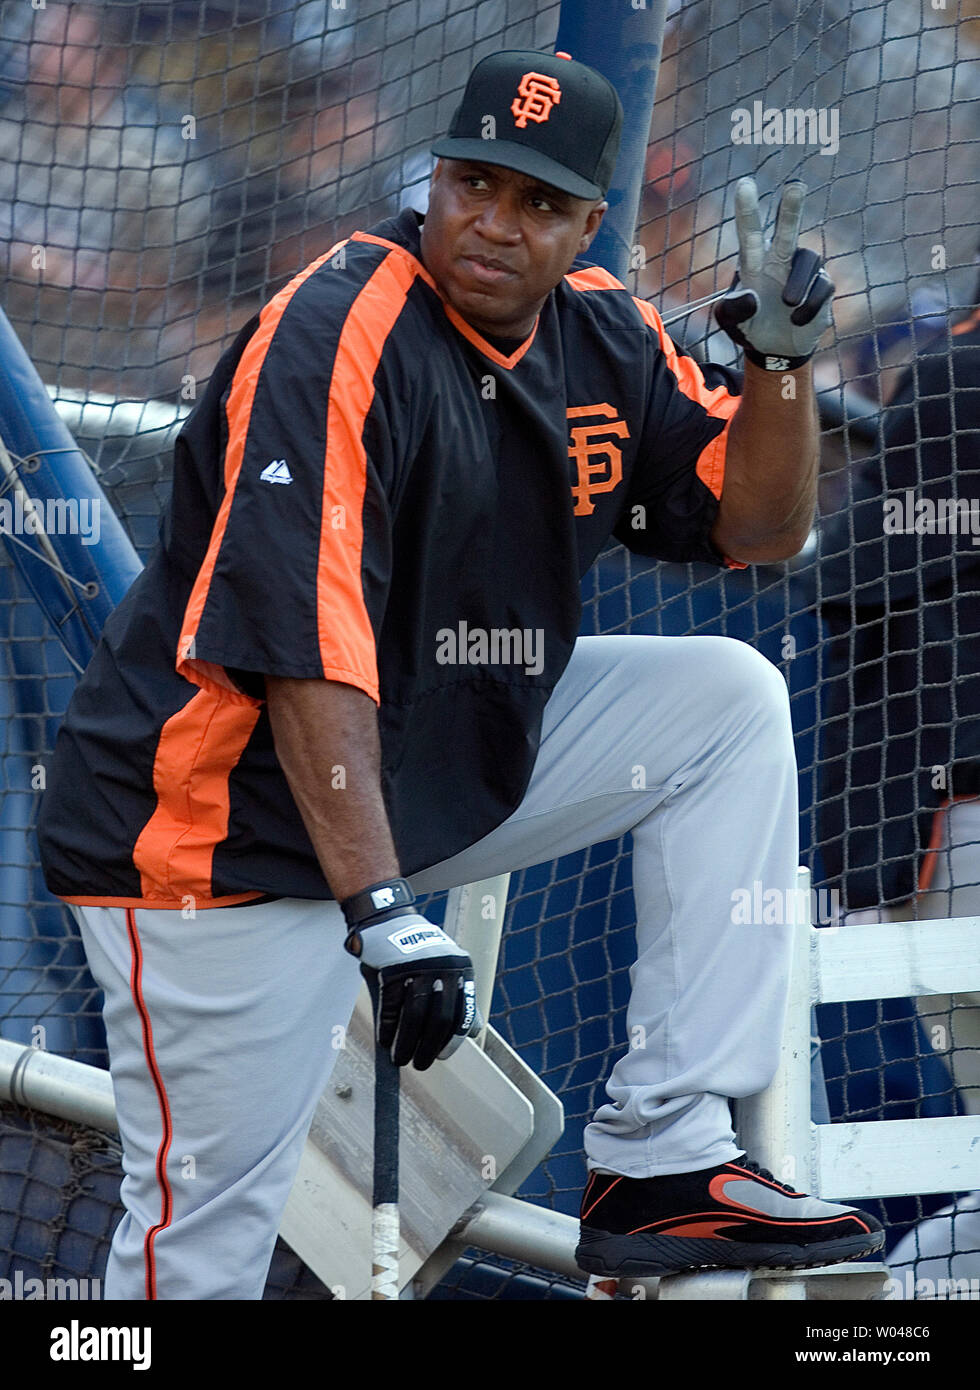 Barry Bonds pirouetting, and other moving images from Giants